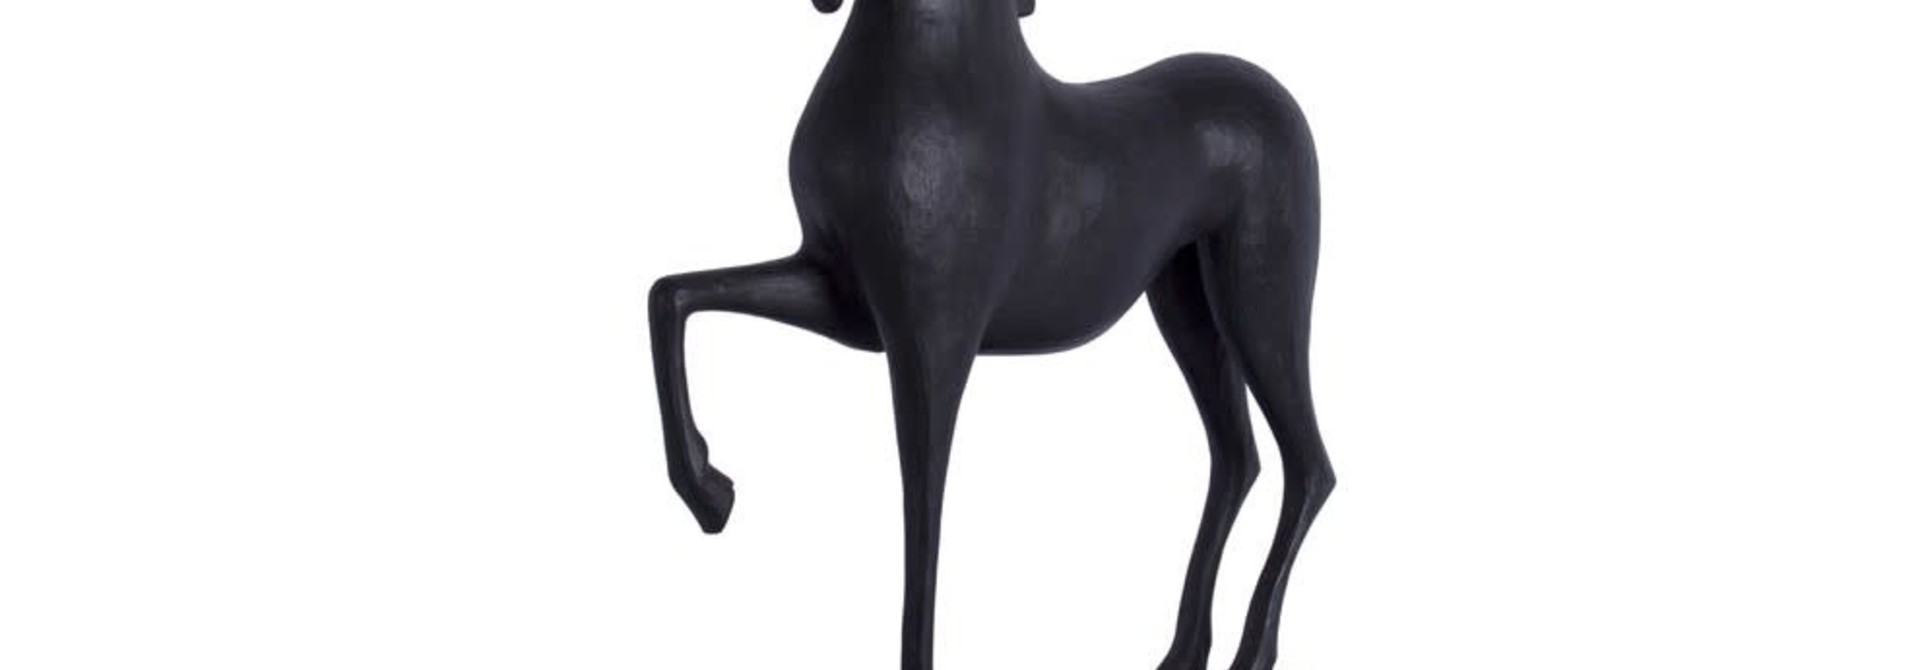 Premier Cheval  | The Sculpture Collection, Black & Gold -  17.5 Inch x 4 Inch x 20 Inch